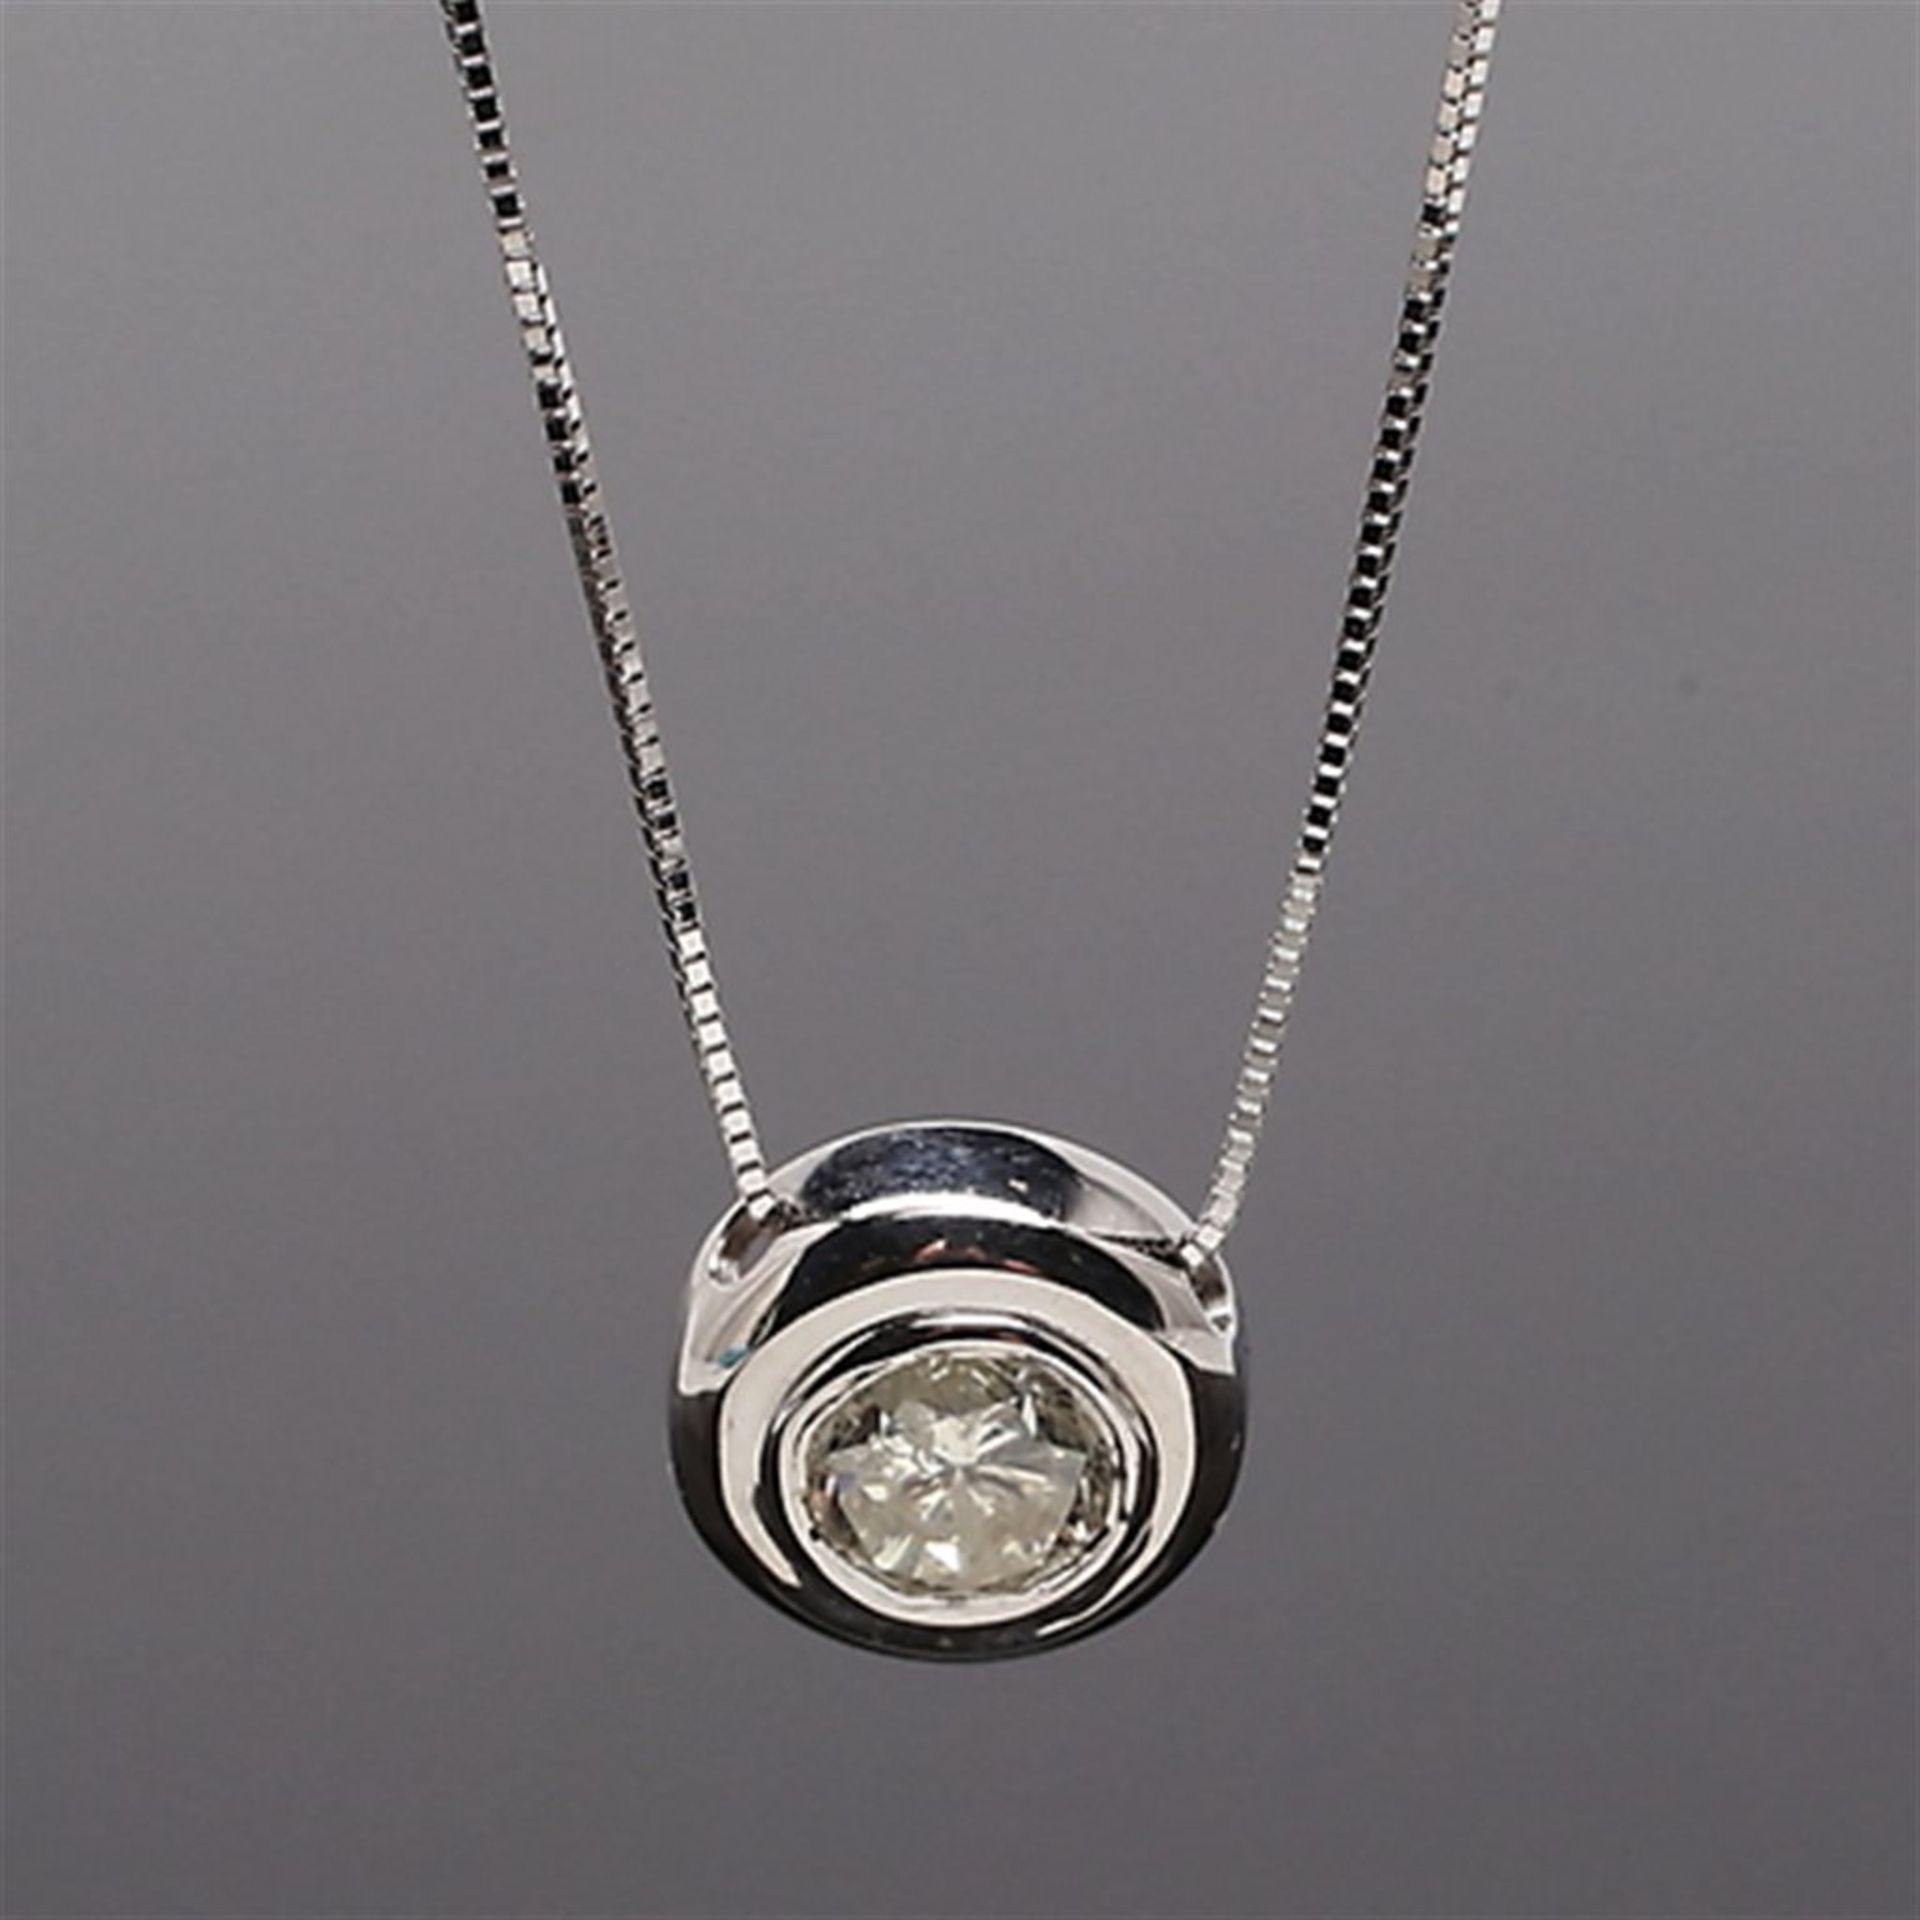 Necklace with pendant in white gold, with 0.70 ct. diamonds